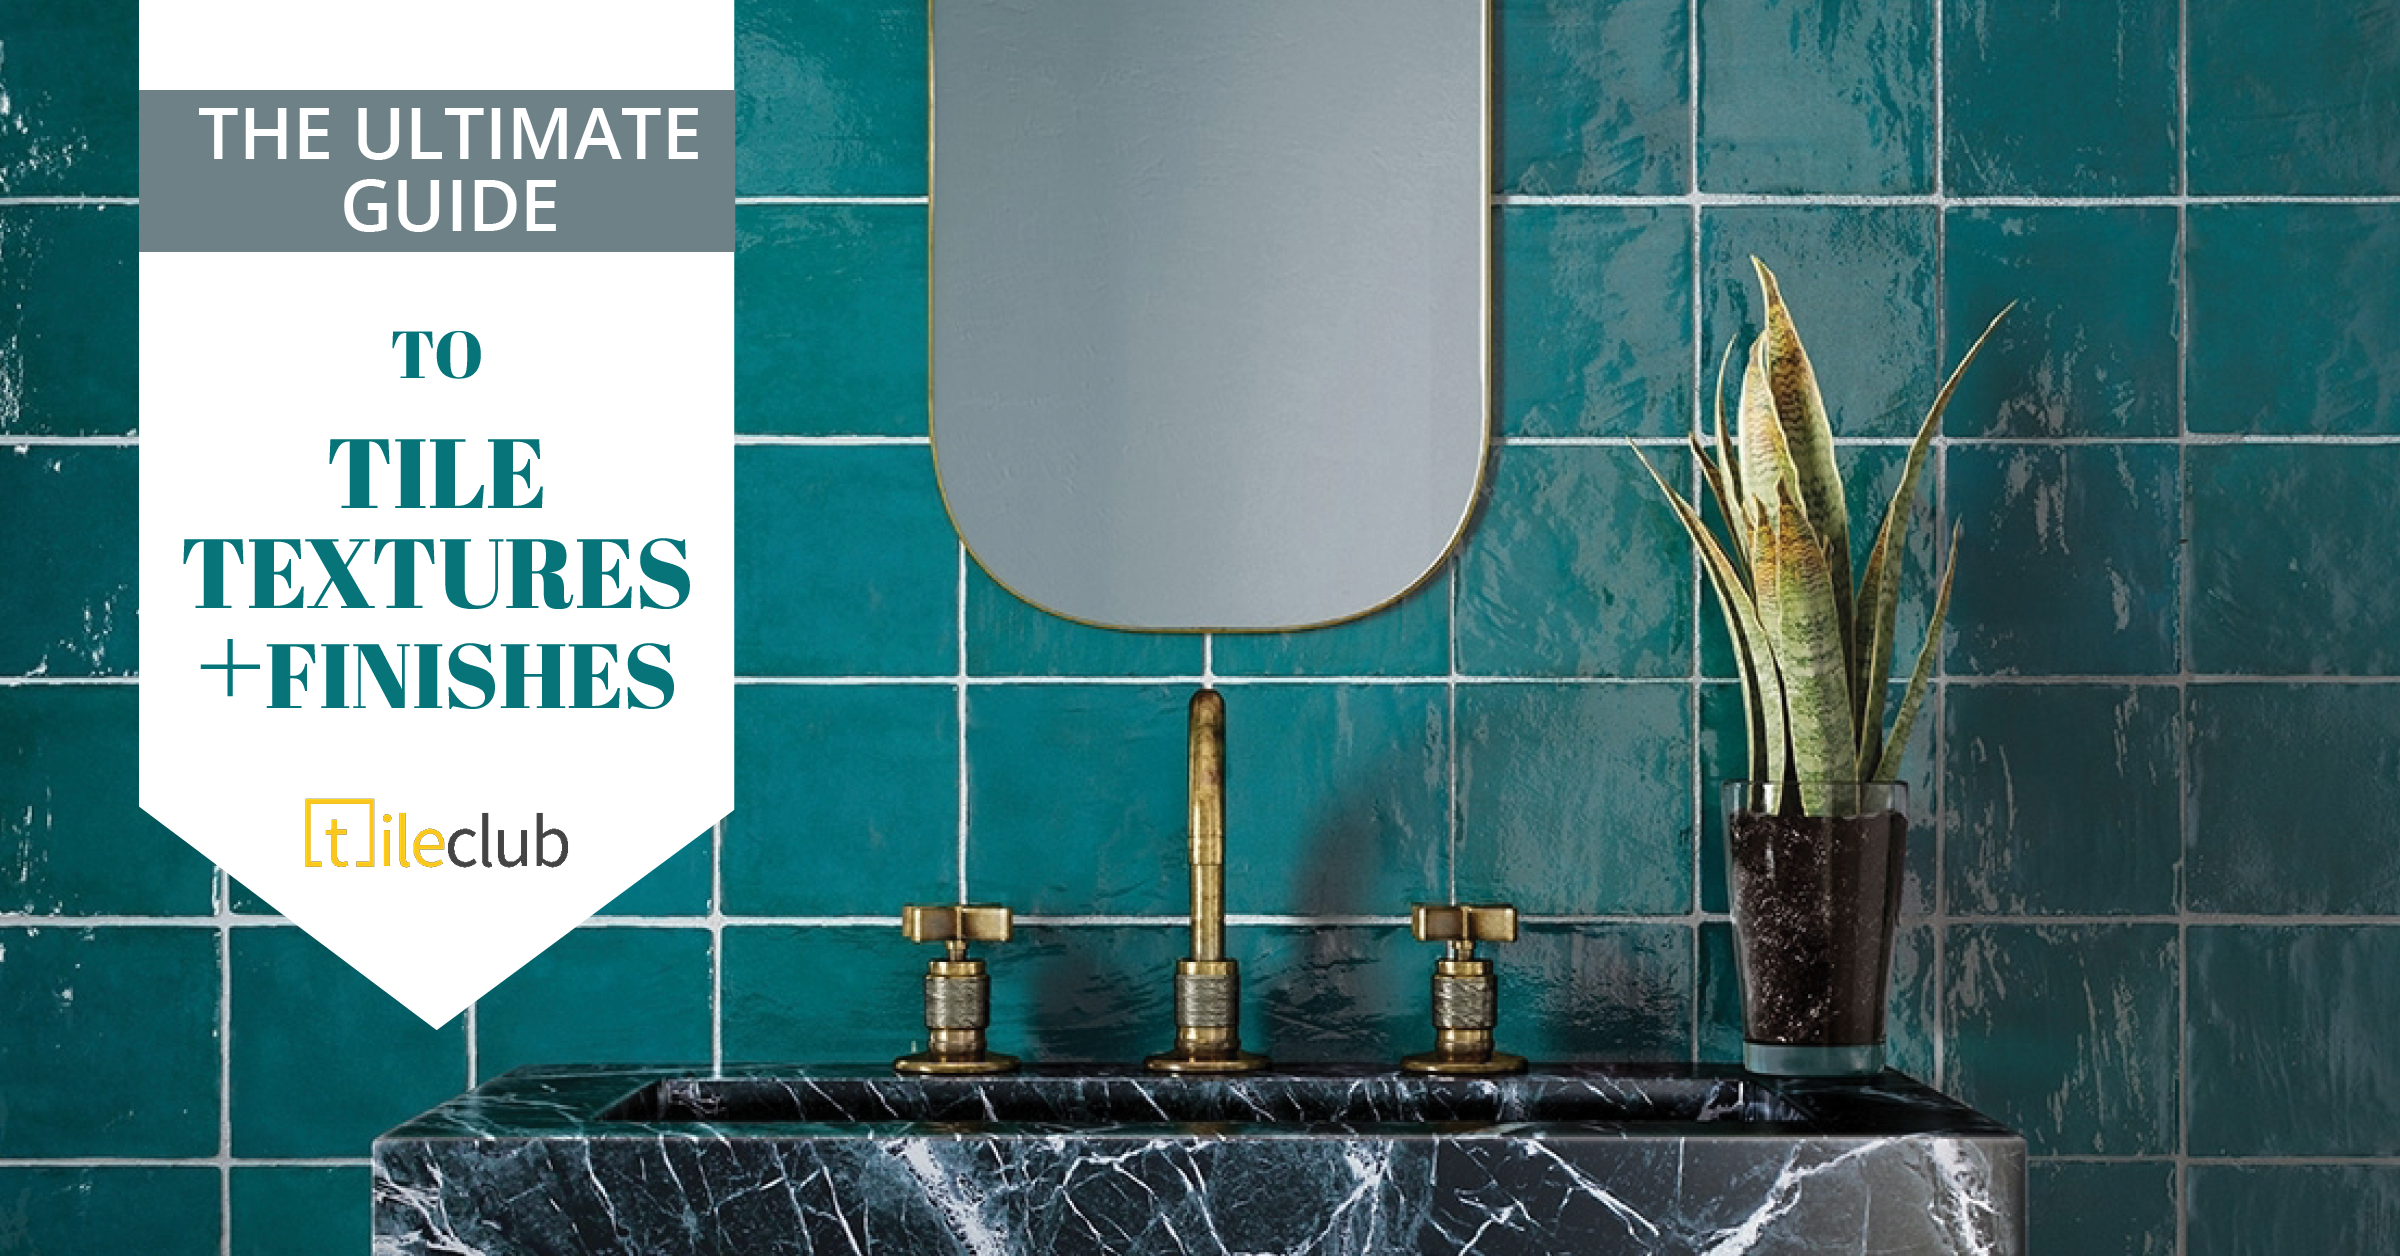 Your Guide to Different Tile Textures and Finishes